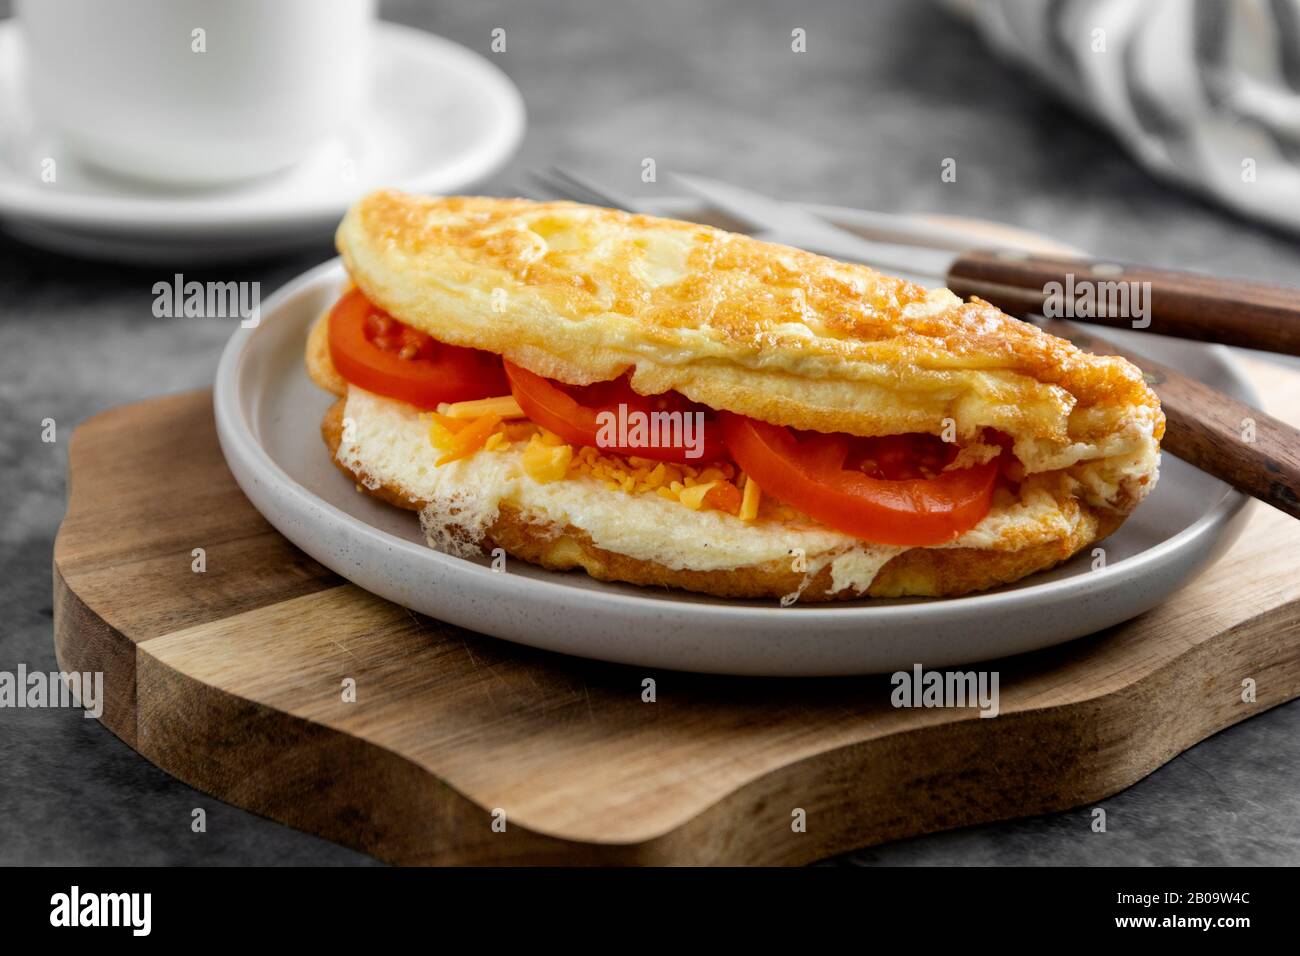 Omelet with cheese and tomatoes. Healthy homemade omelette for breakfast. Stock Photo